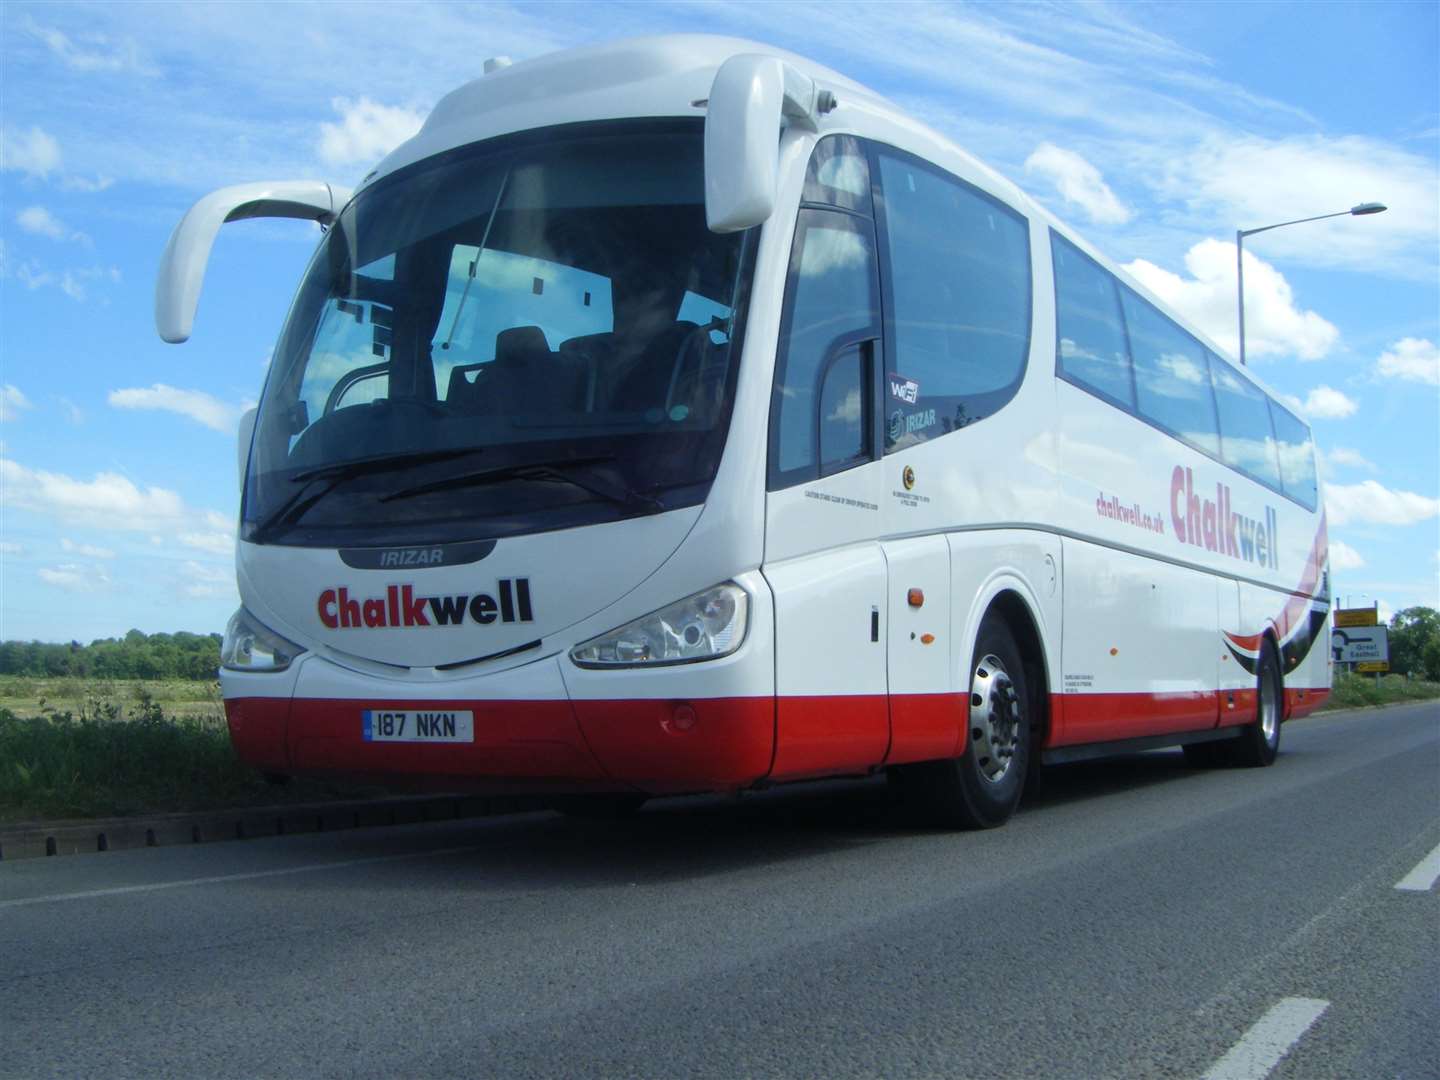 The incident happened on board a Chalkwell coach today. Stock picture